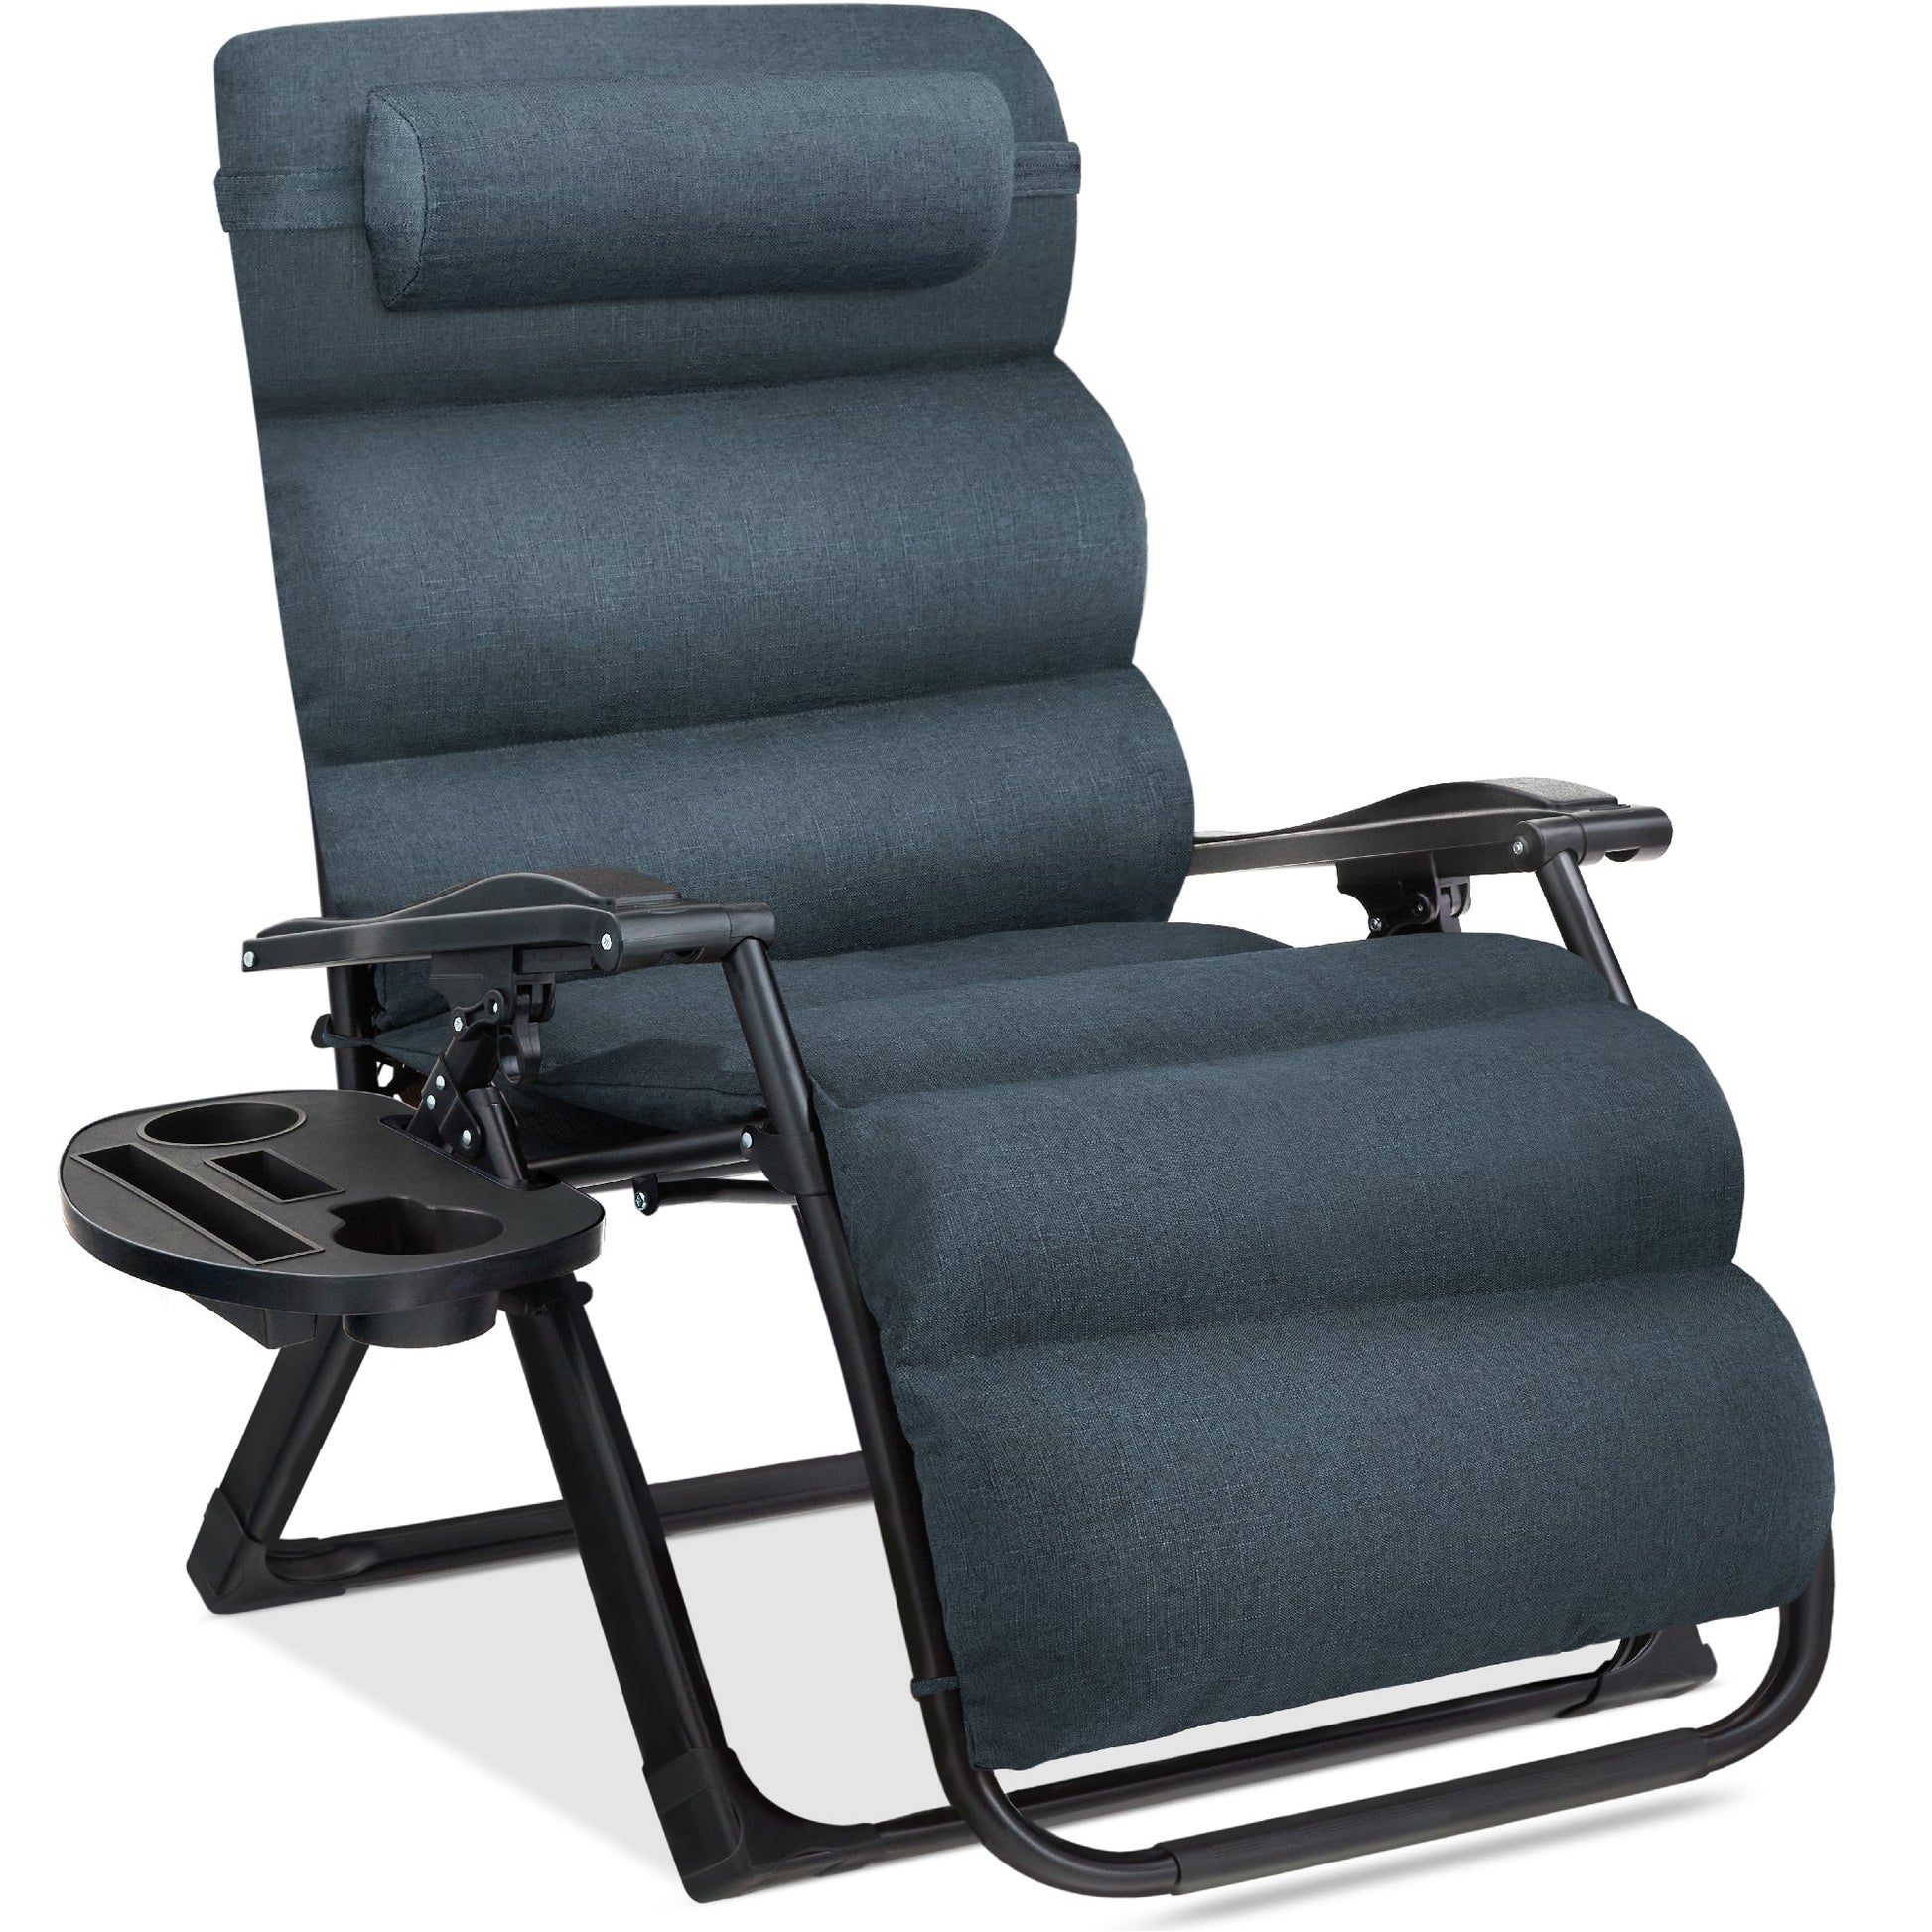 Oversized Zero Gravity Chair, Folding Outdoor Recliner w/ Removable Cushion